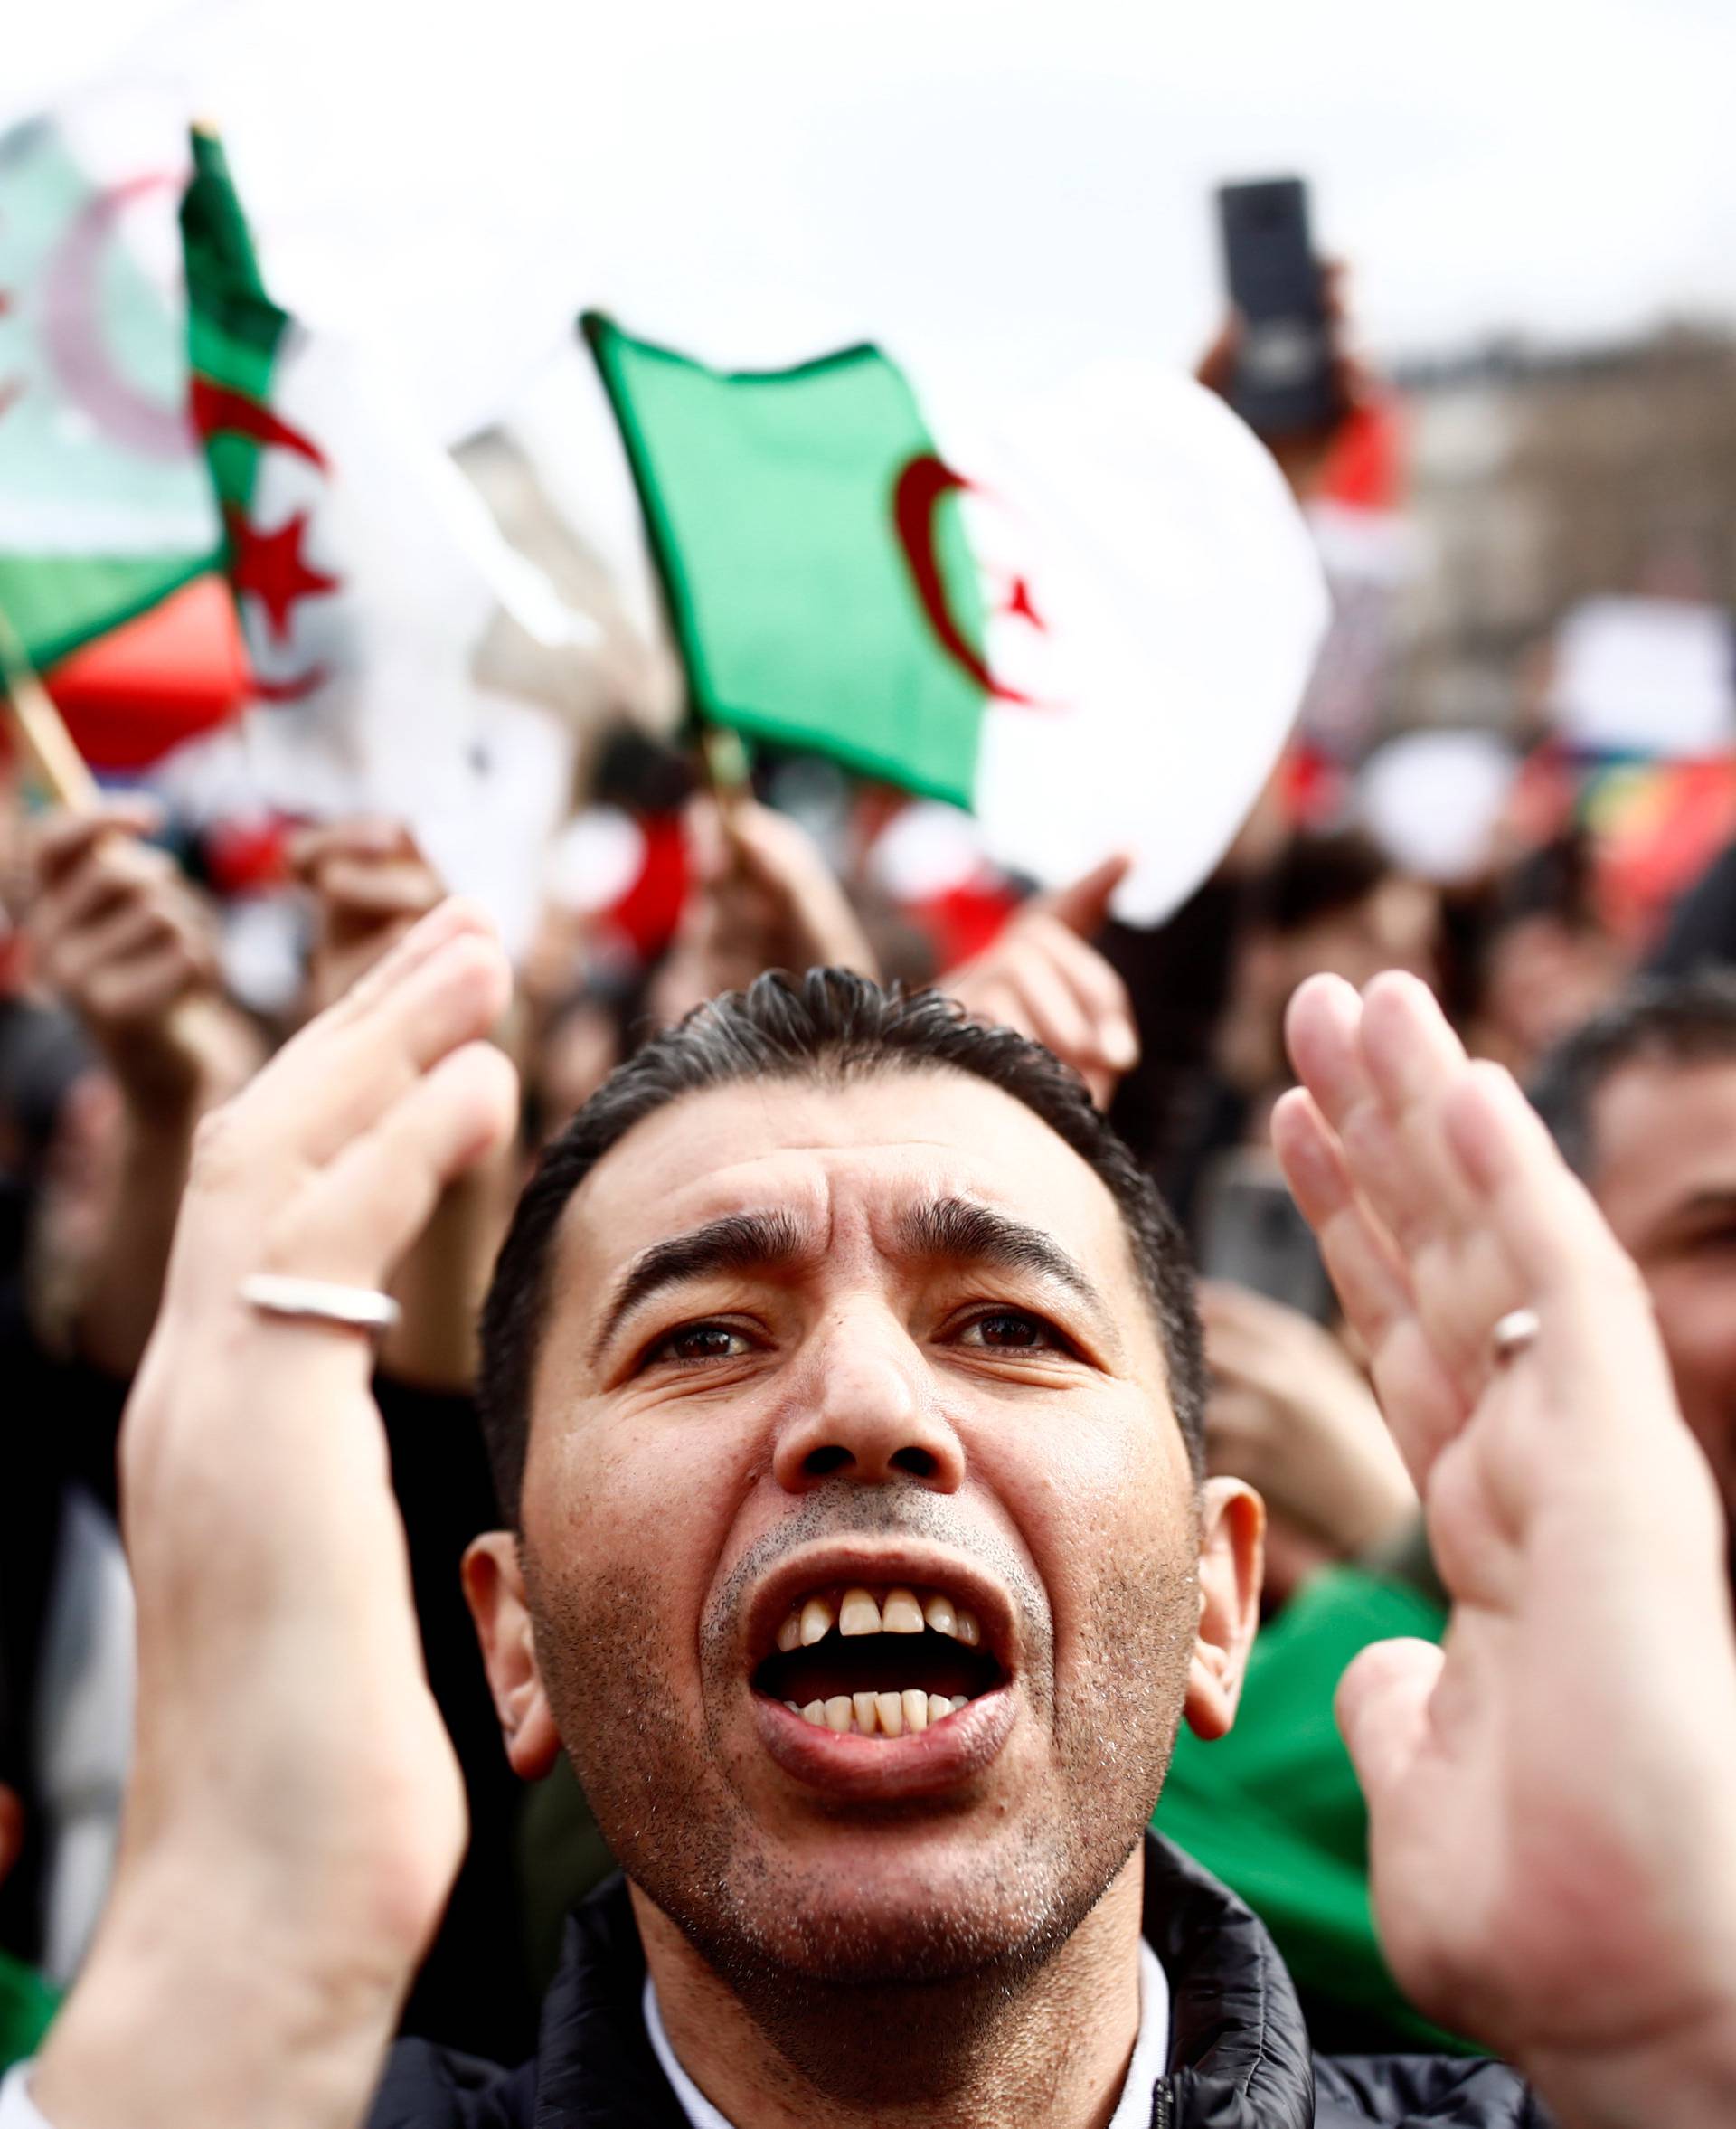 Demonstrators gather near the Monument to the Republic during a protest against Algerian President Abdelaziz Bouteflika seeking a fifth term in a presidential election in Paris